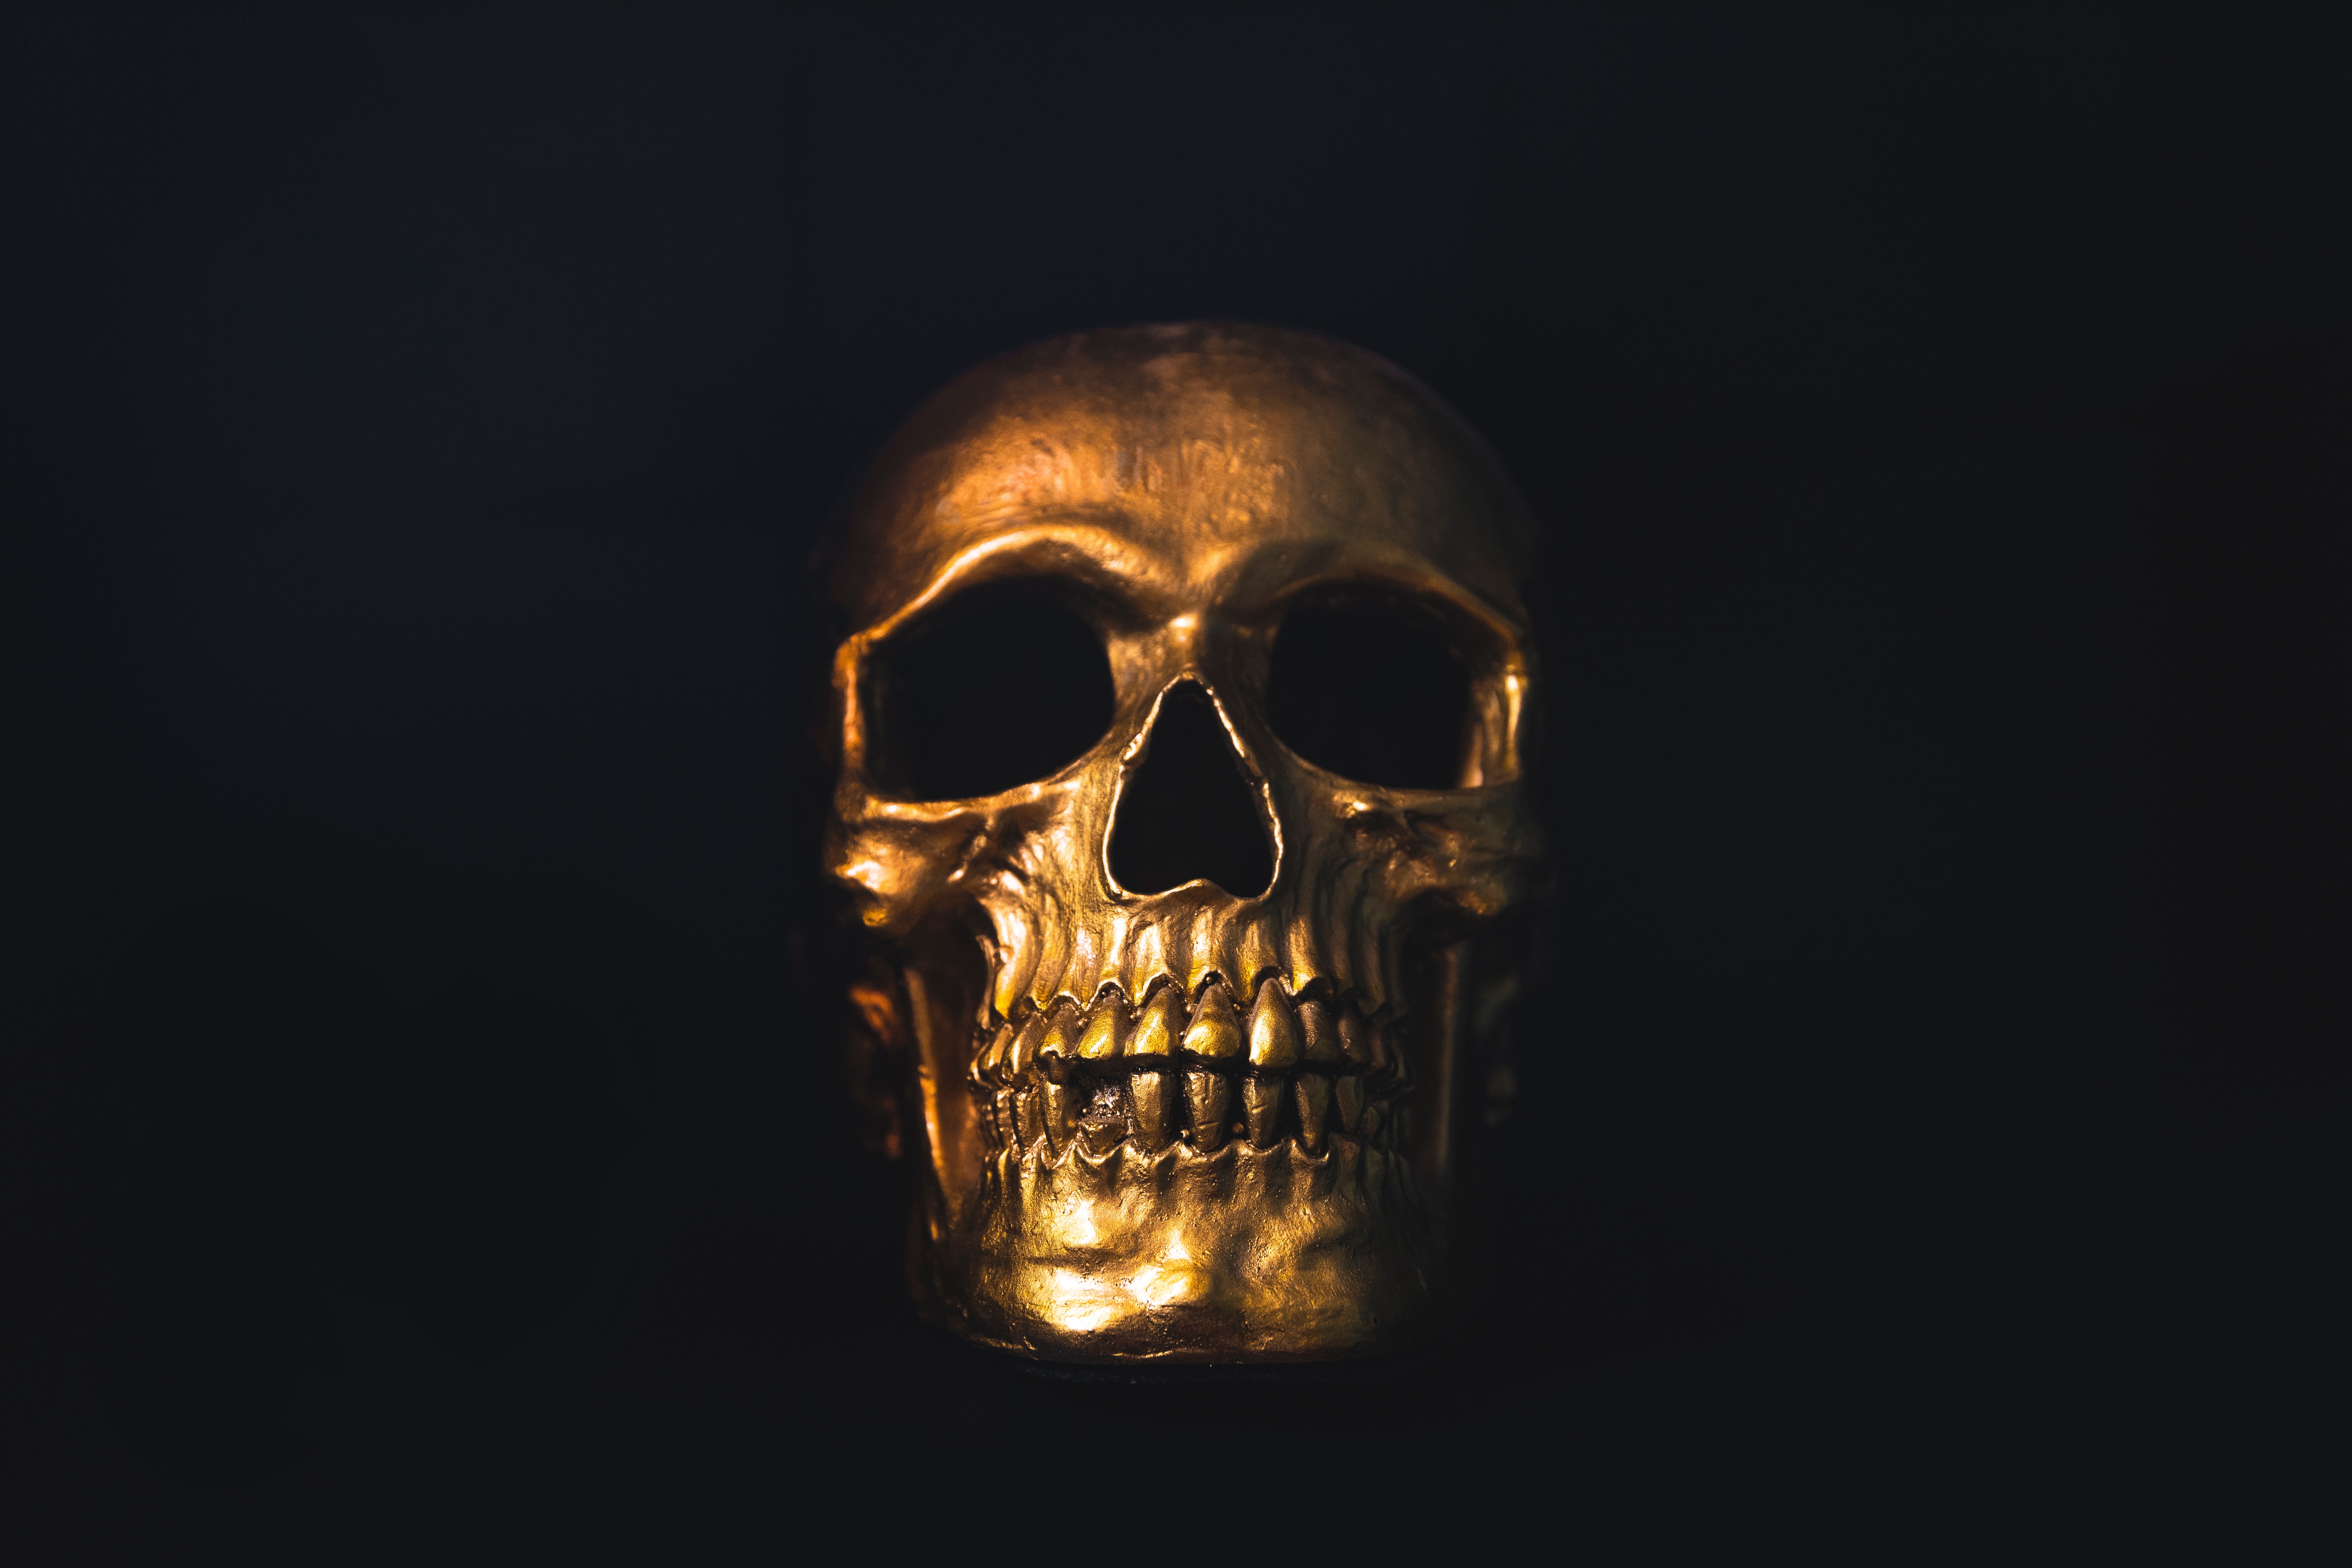 Download free Skull HD pictures